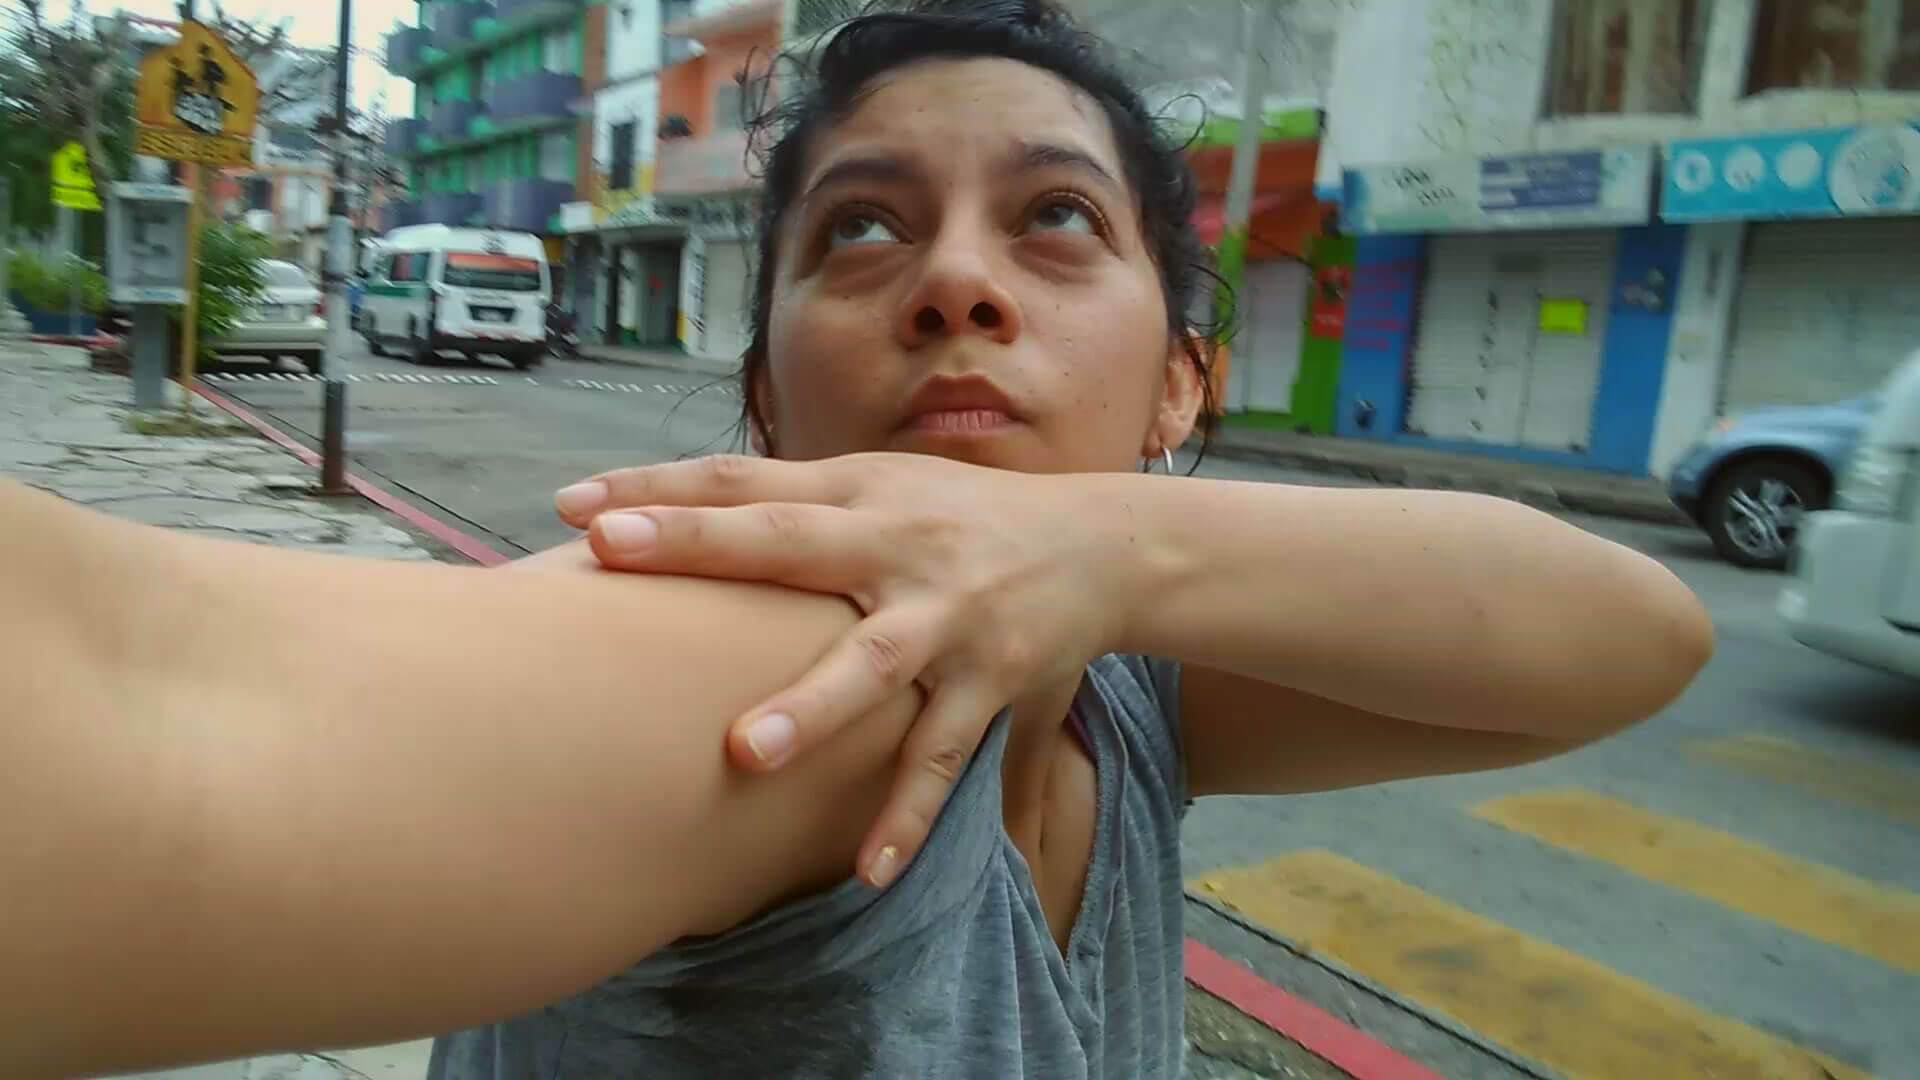 A woman with dark haired pulled away from her face, in short sleeves looks up and traces her extended right arm with left hand on a city street.